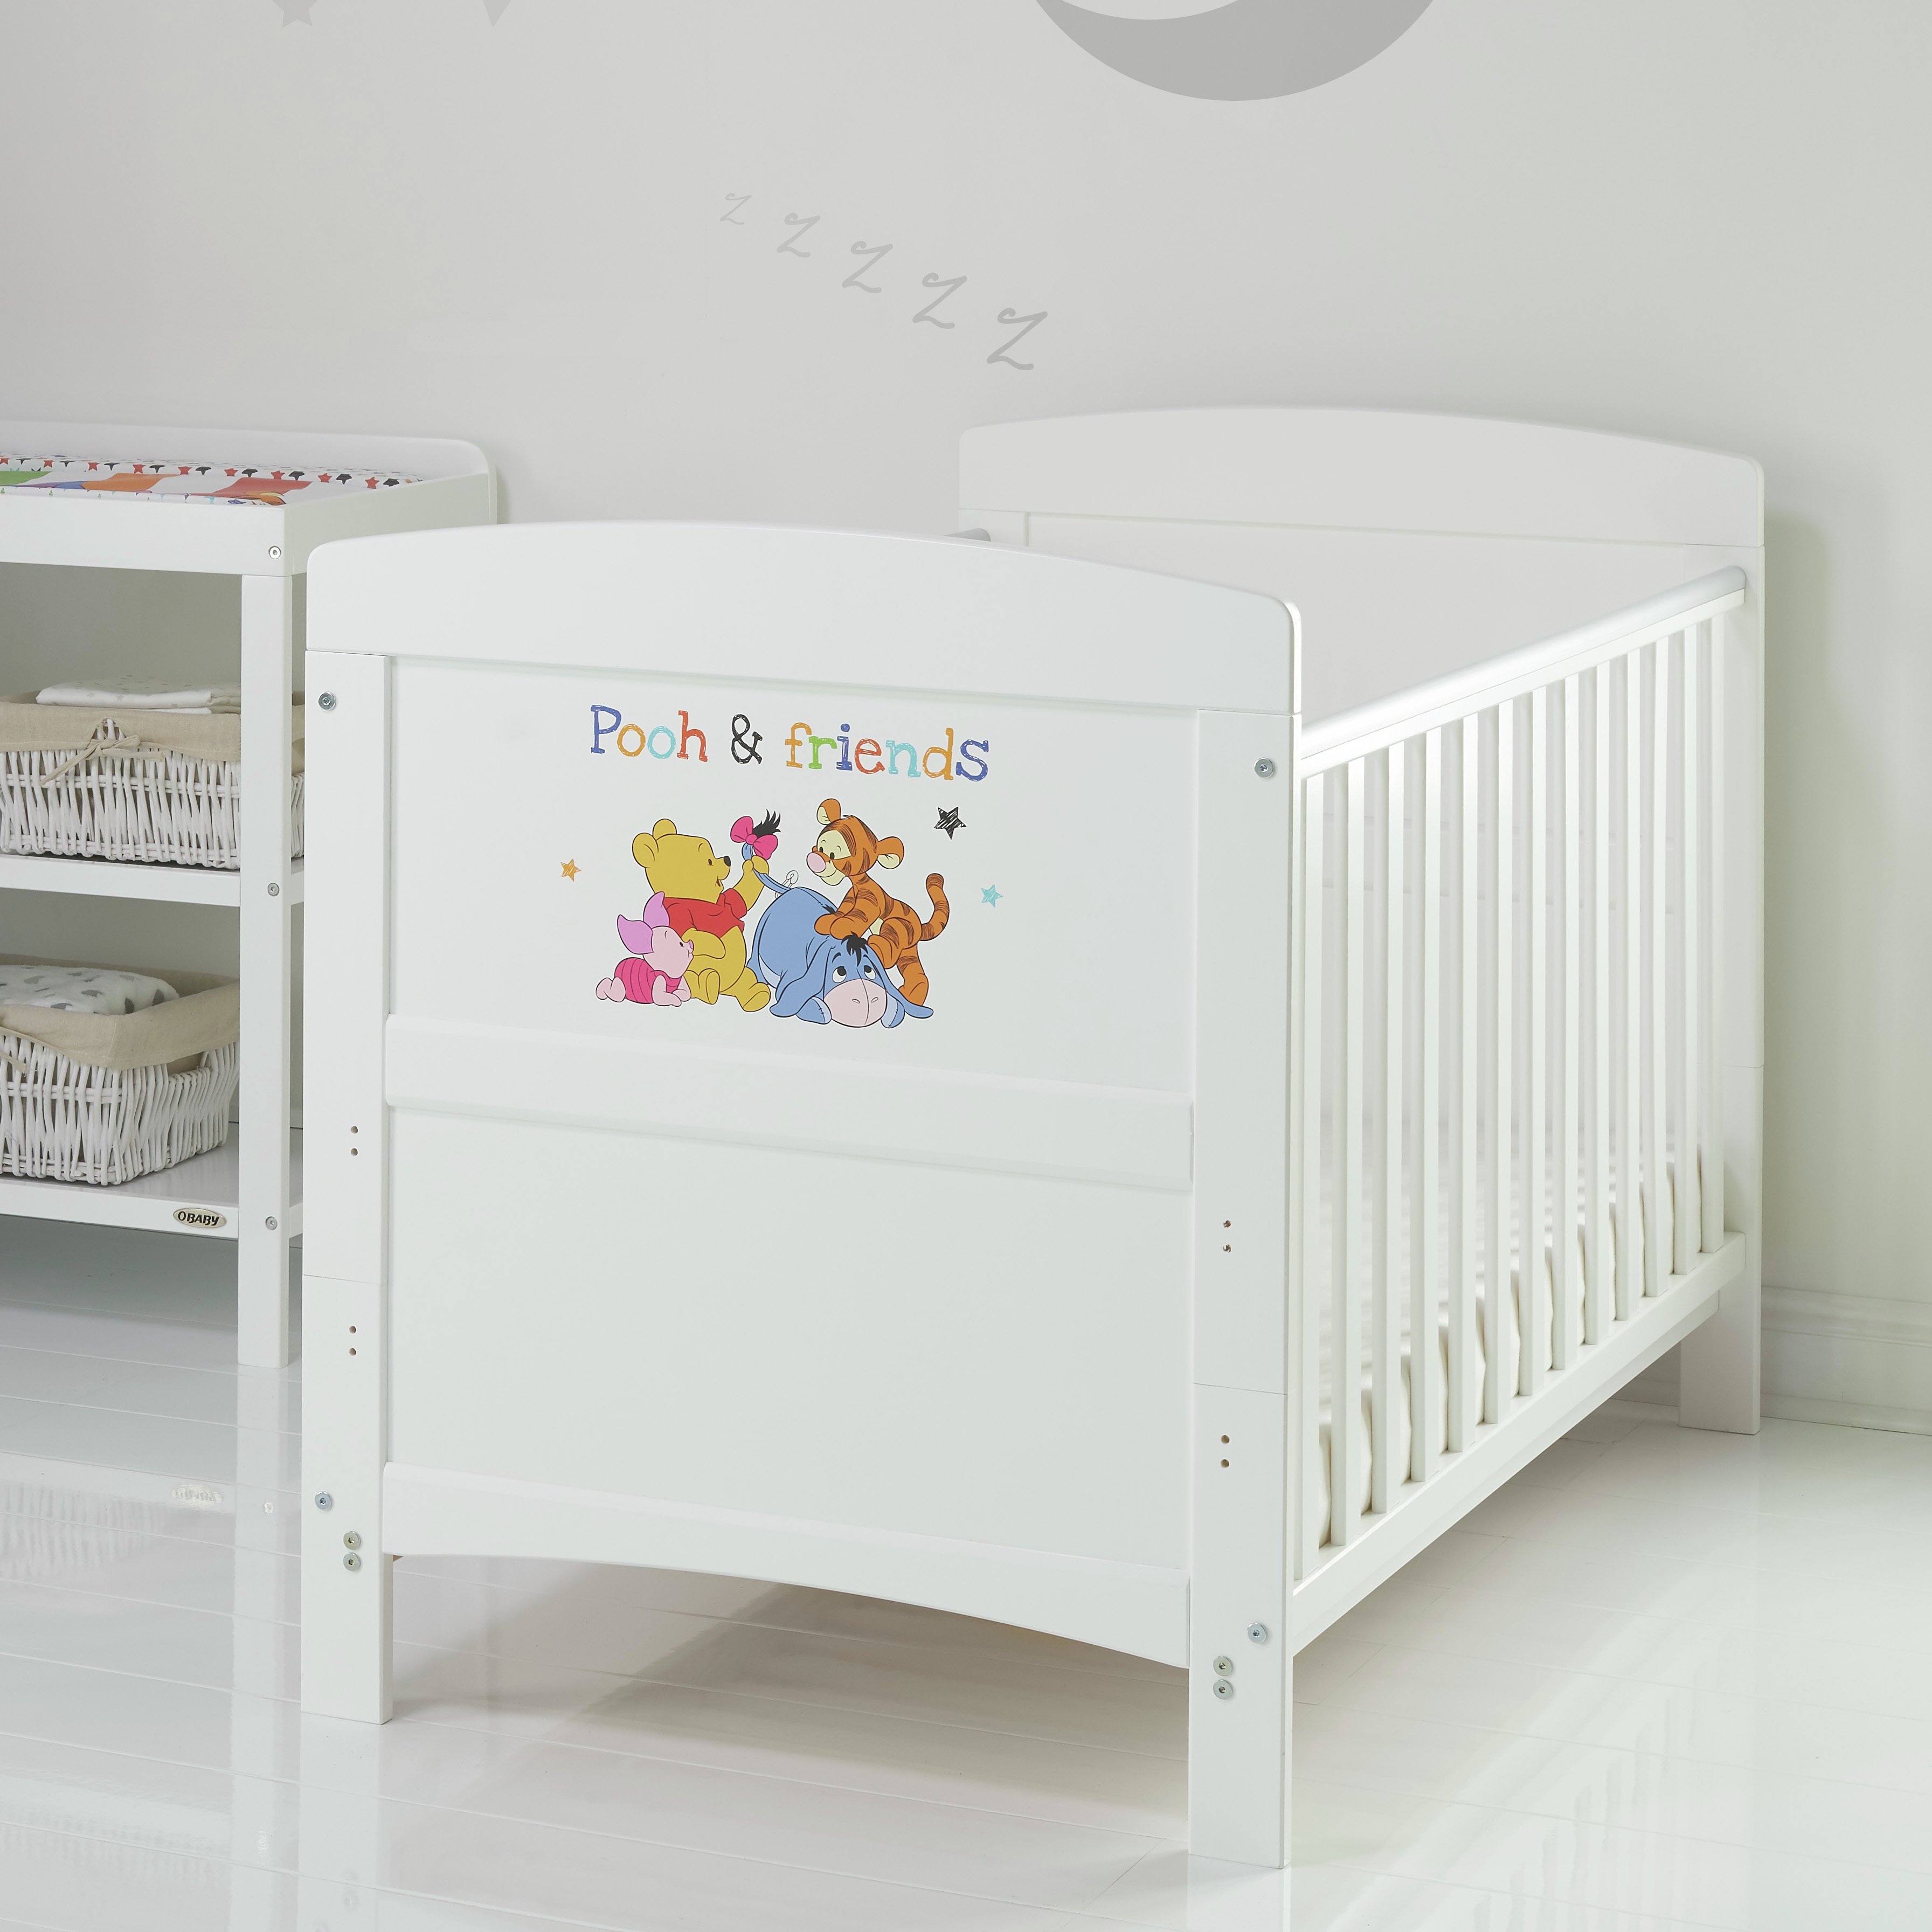 cot change table and drawers set